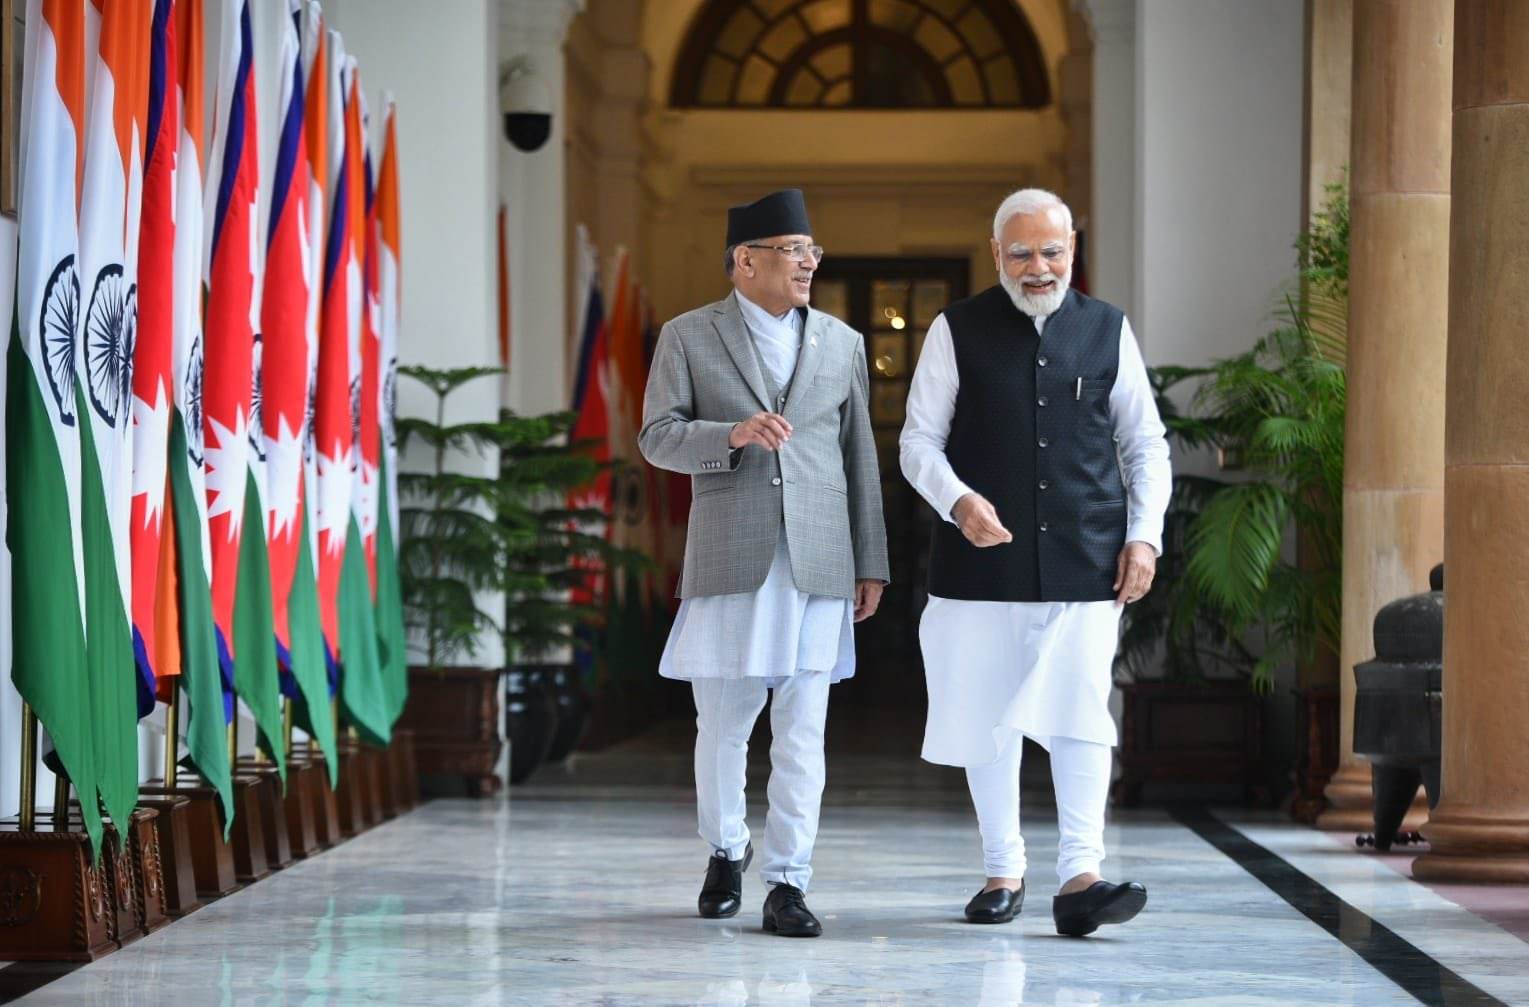 Nepal, India sign key agreements and consent for strengthening bilateral ties